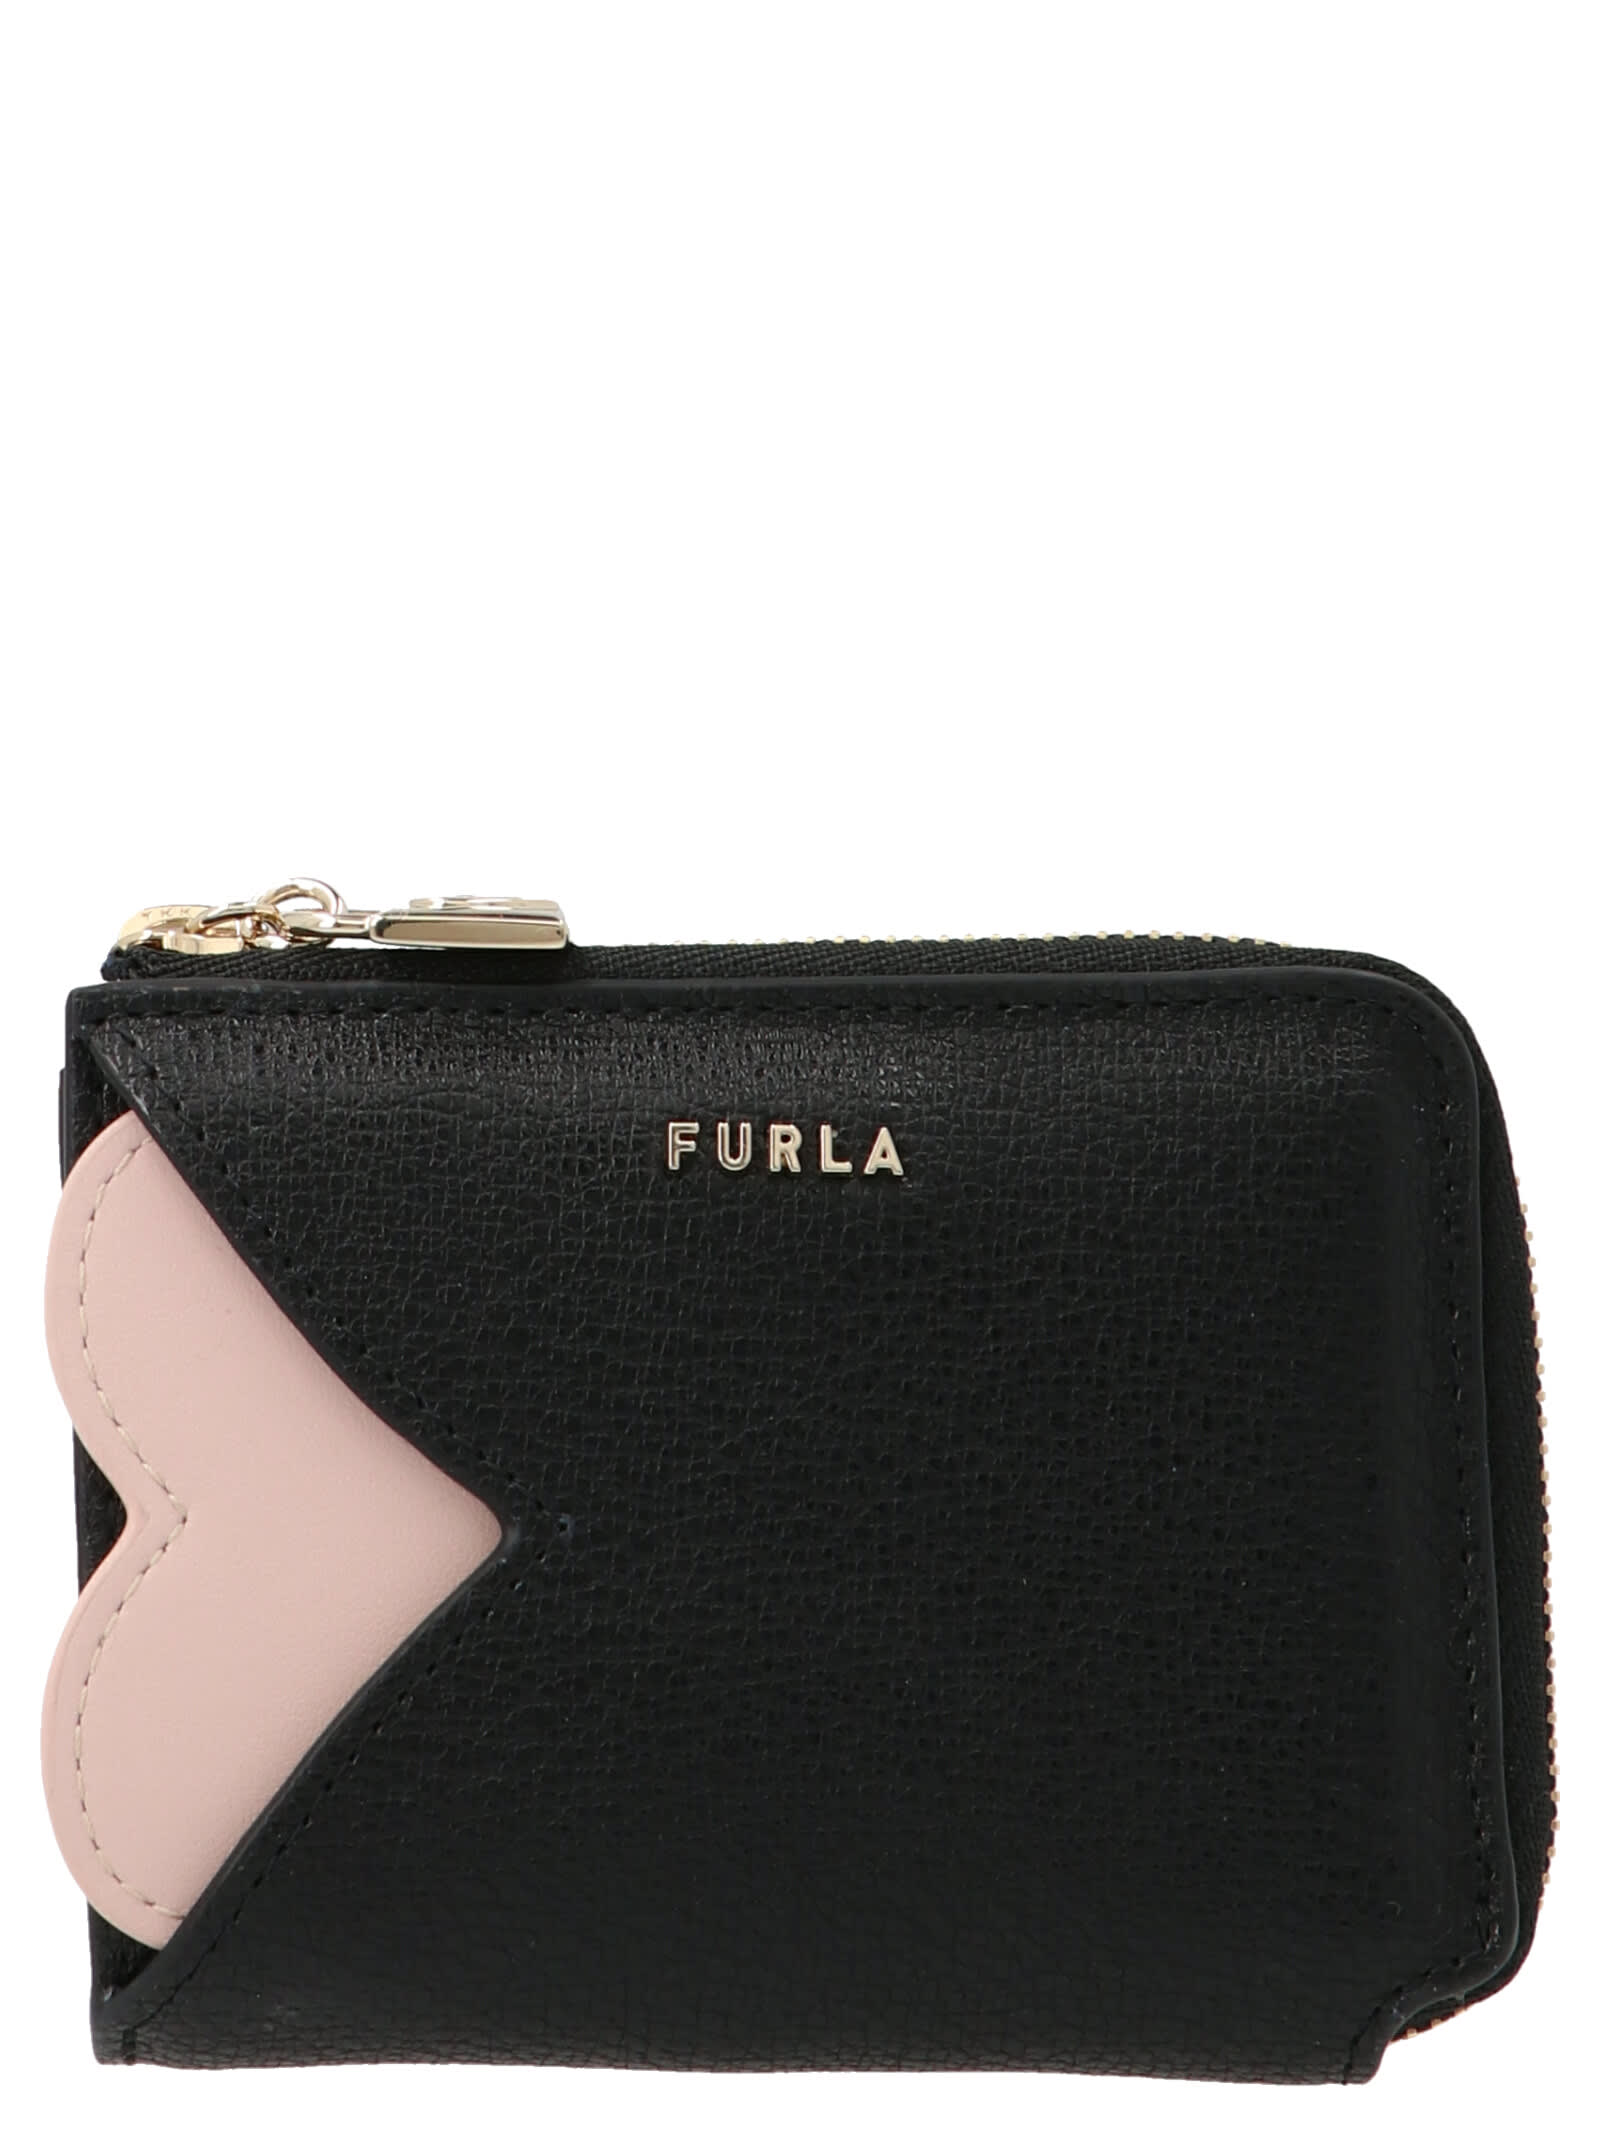 Furla compact Lovely Small Wallet